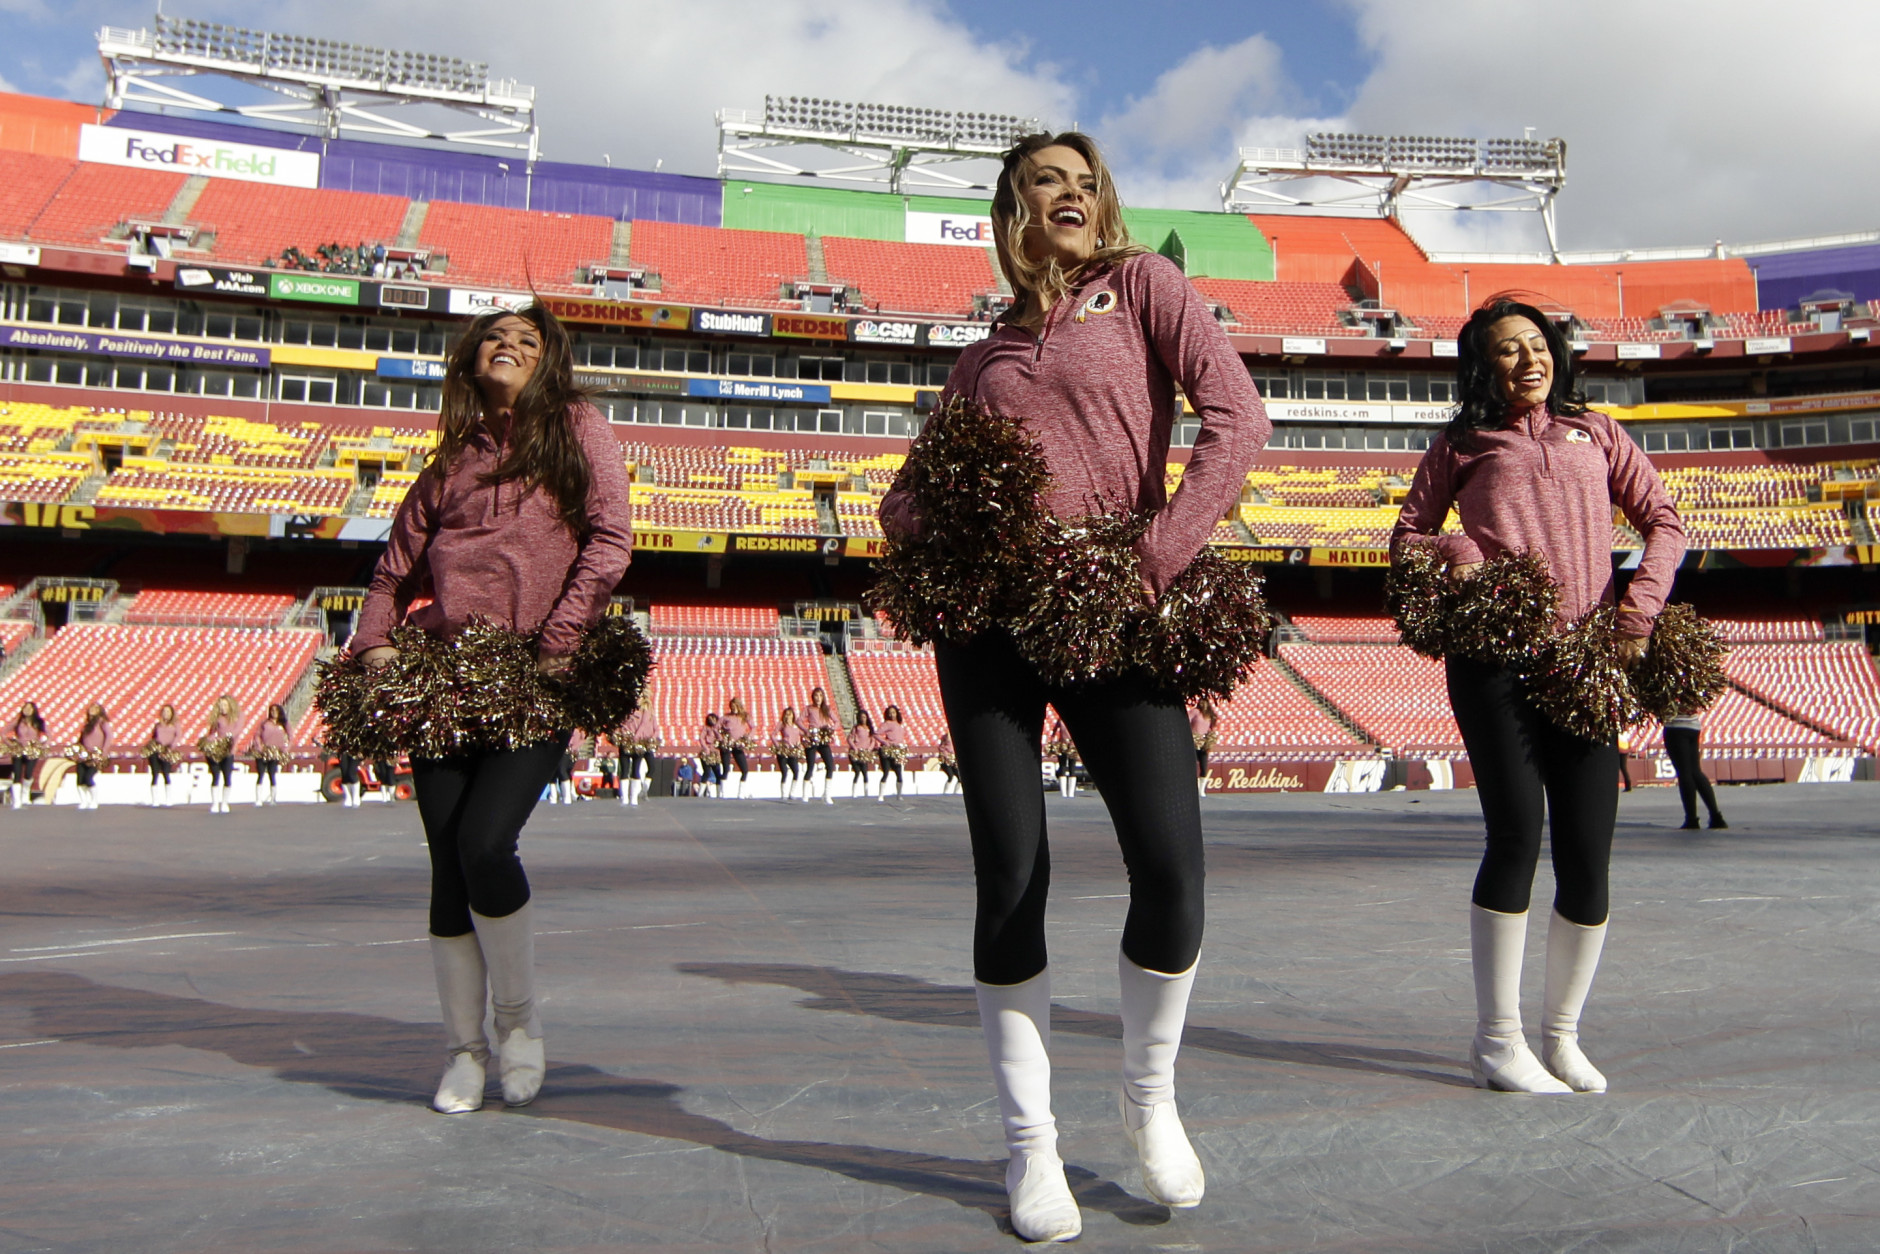 The Washington Redskins cheerleaders warm up before an NFL football game against the Green Bay Packers in Landover, Md., Sunday, Jan. 10, 2016. (AP Photo/Mark Tenally)